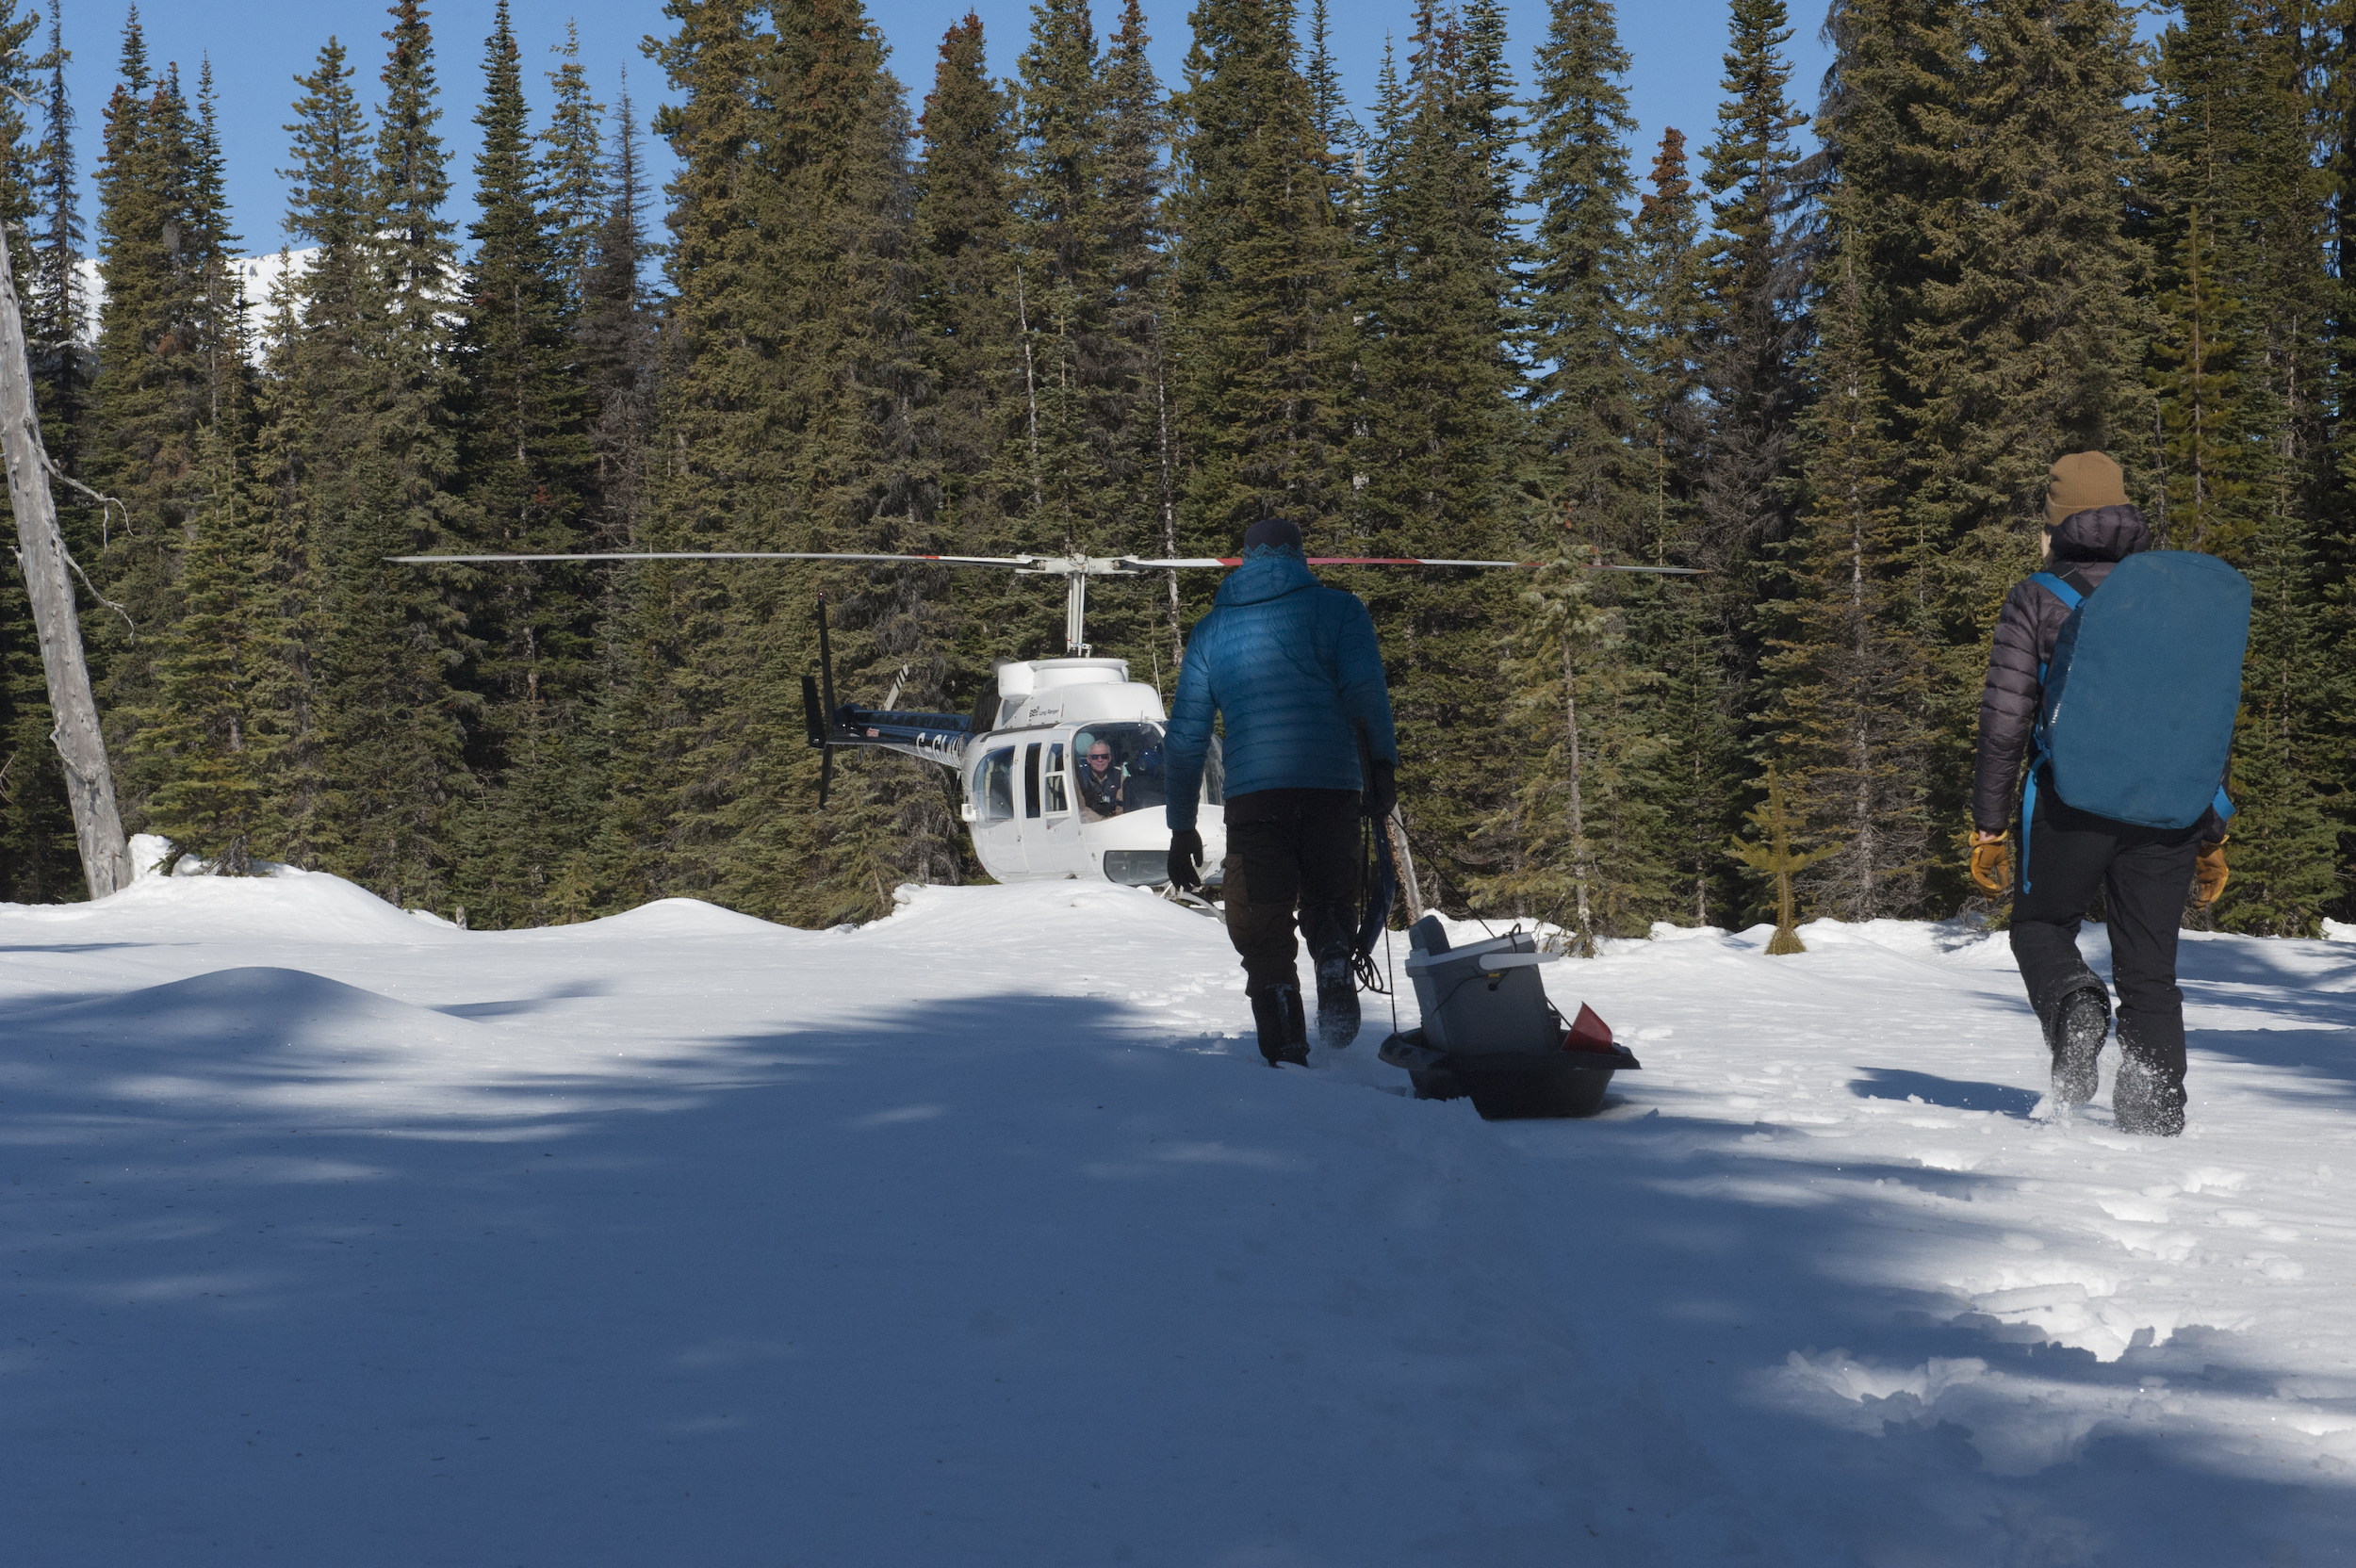 Caribou researchers drag a sled filled with equipment to a helicopter in a snowy clearing